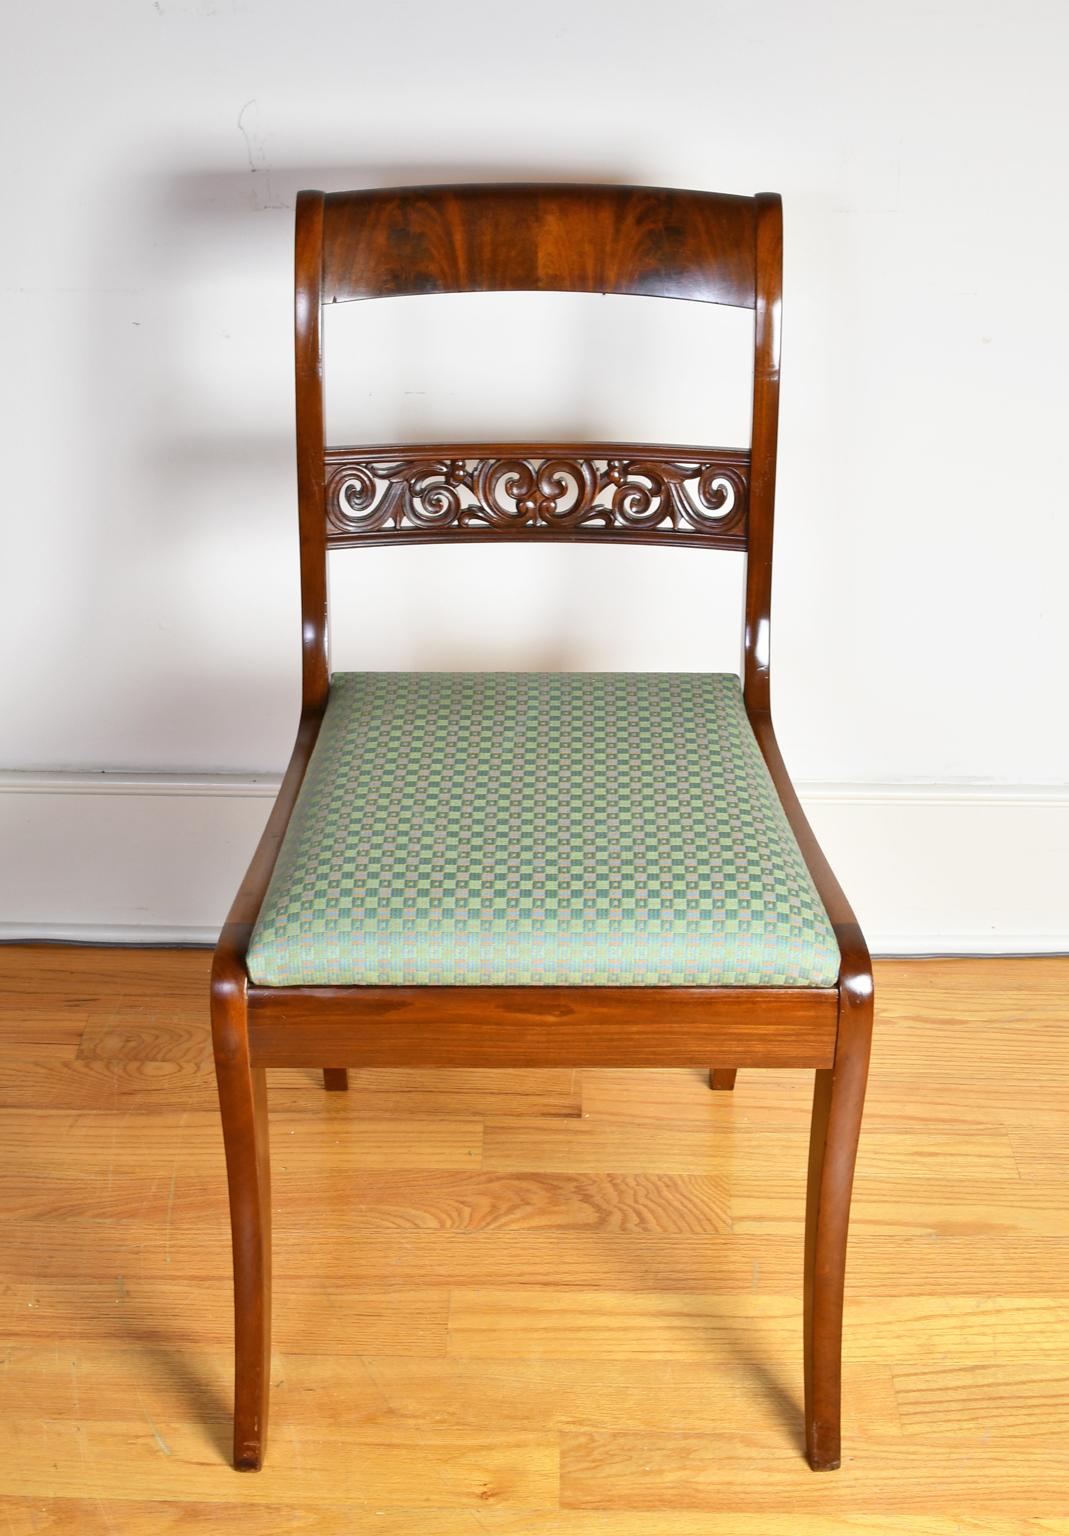 Set of 11 Antique Dining Chairs with 9 Sides & 2 Arms in West Indies Mahogany For Sale 5